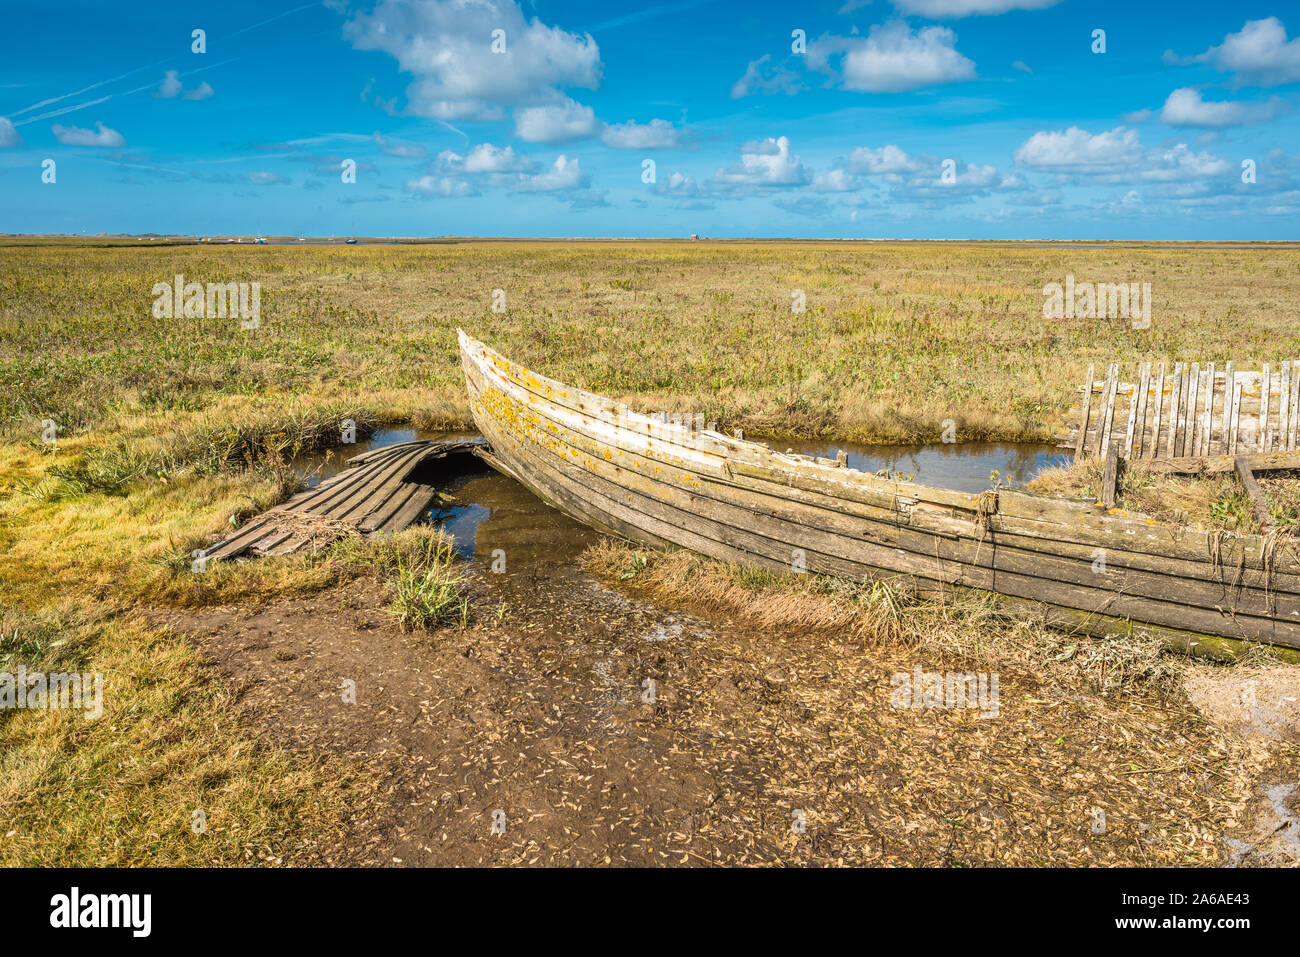 Rustic old boat left to decay on Salt Marshes between Blakeney and Cley next the sea coastal villages on North Norfolk Coast, East of England, UK. Stock Photo